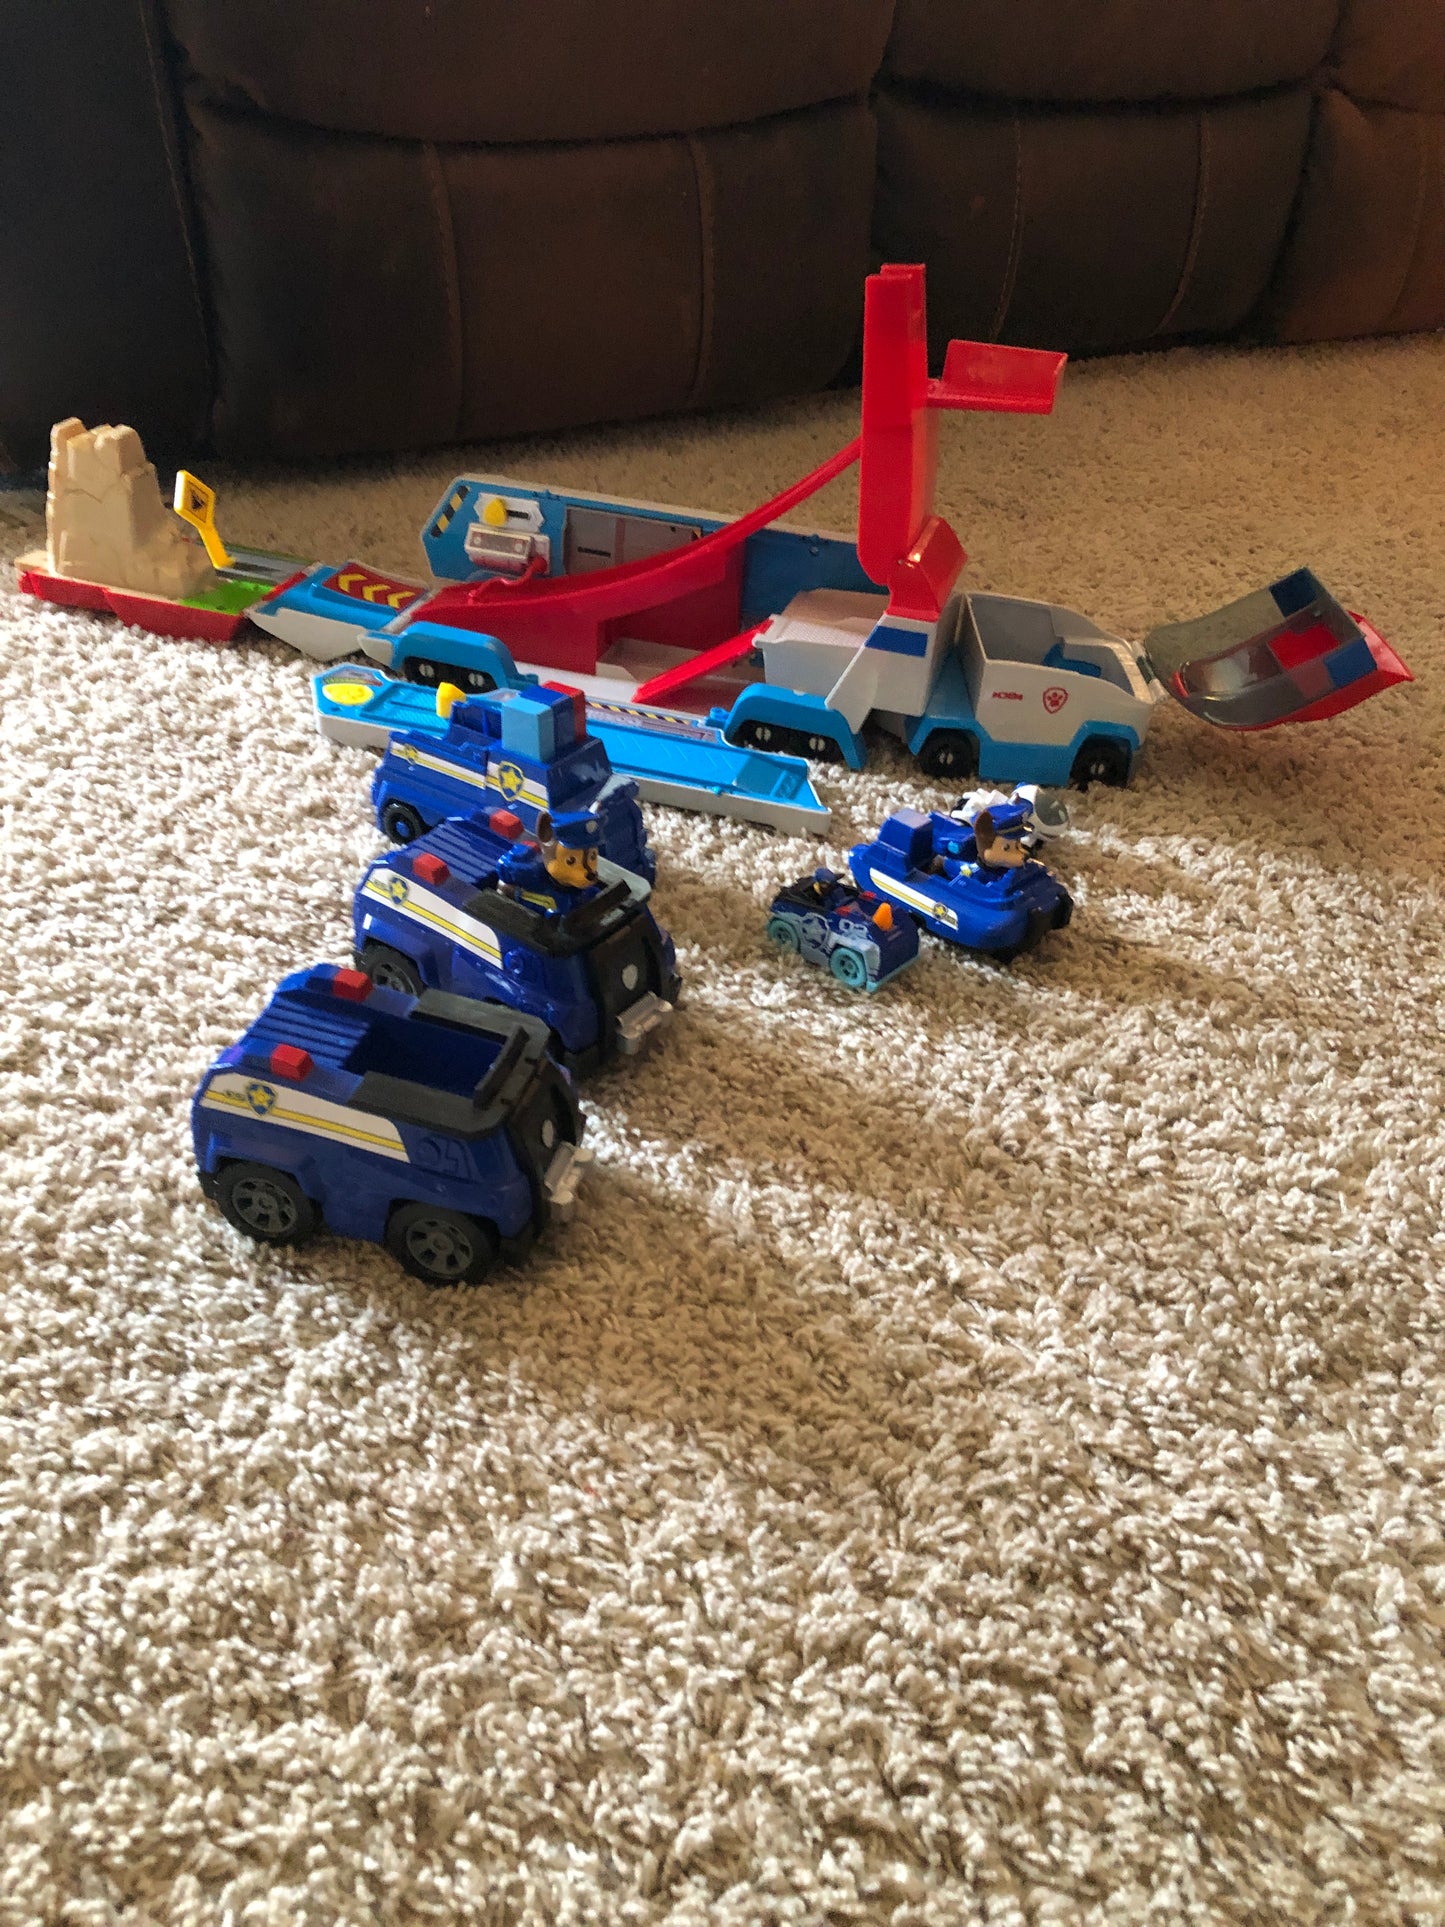 REDUCED PRICE Paw patrol launch and haul patroller toy